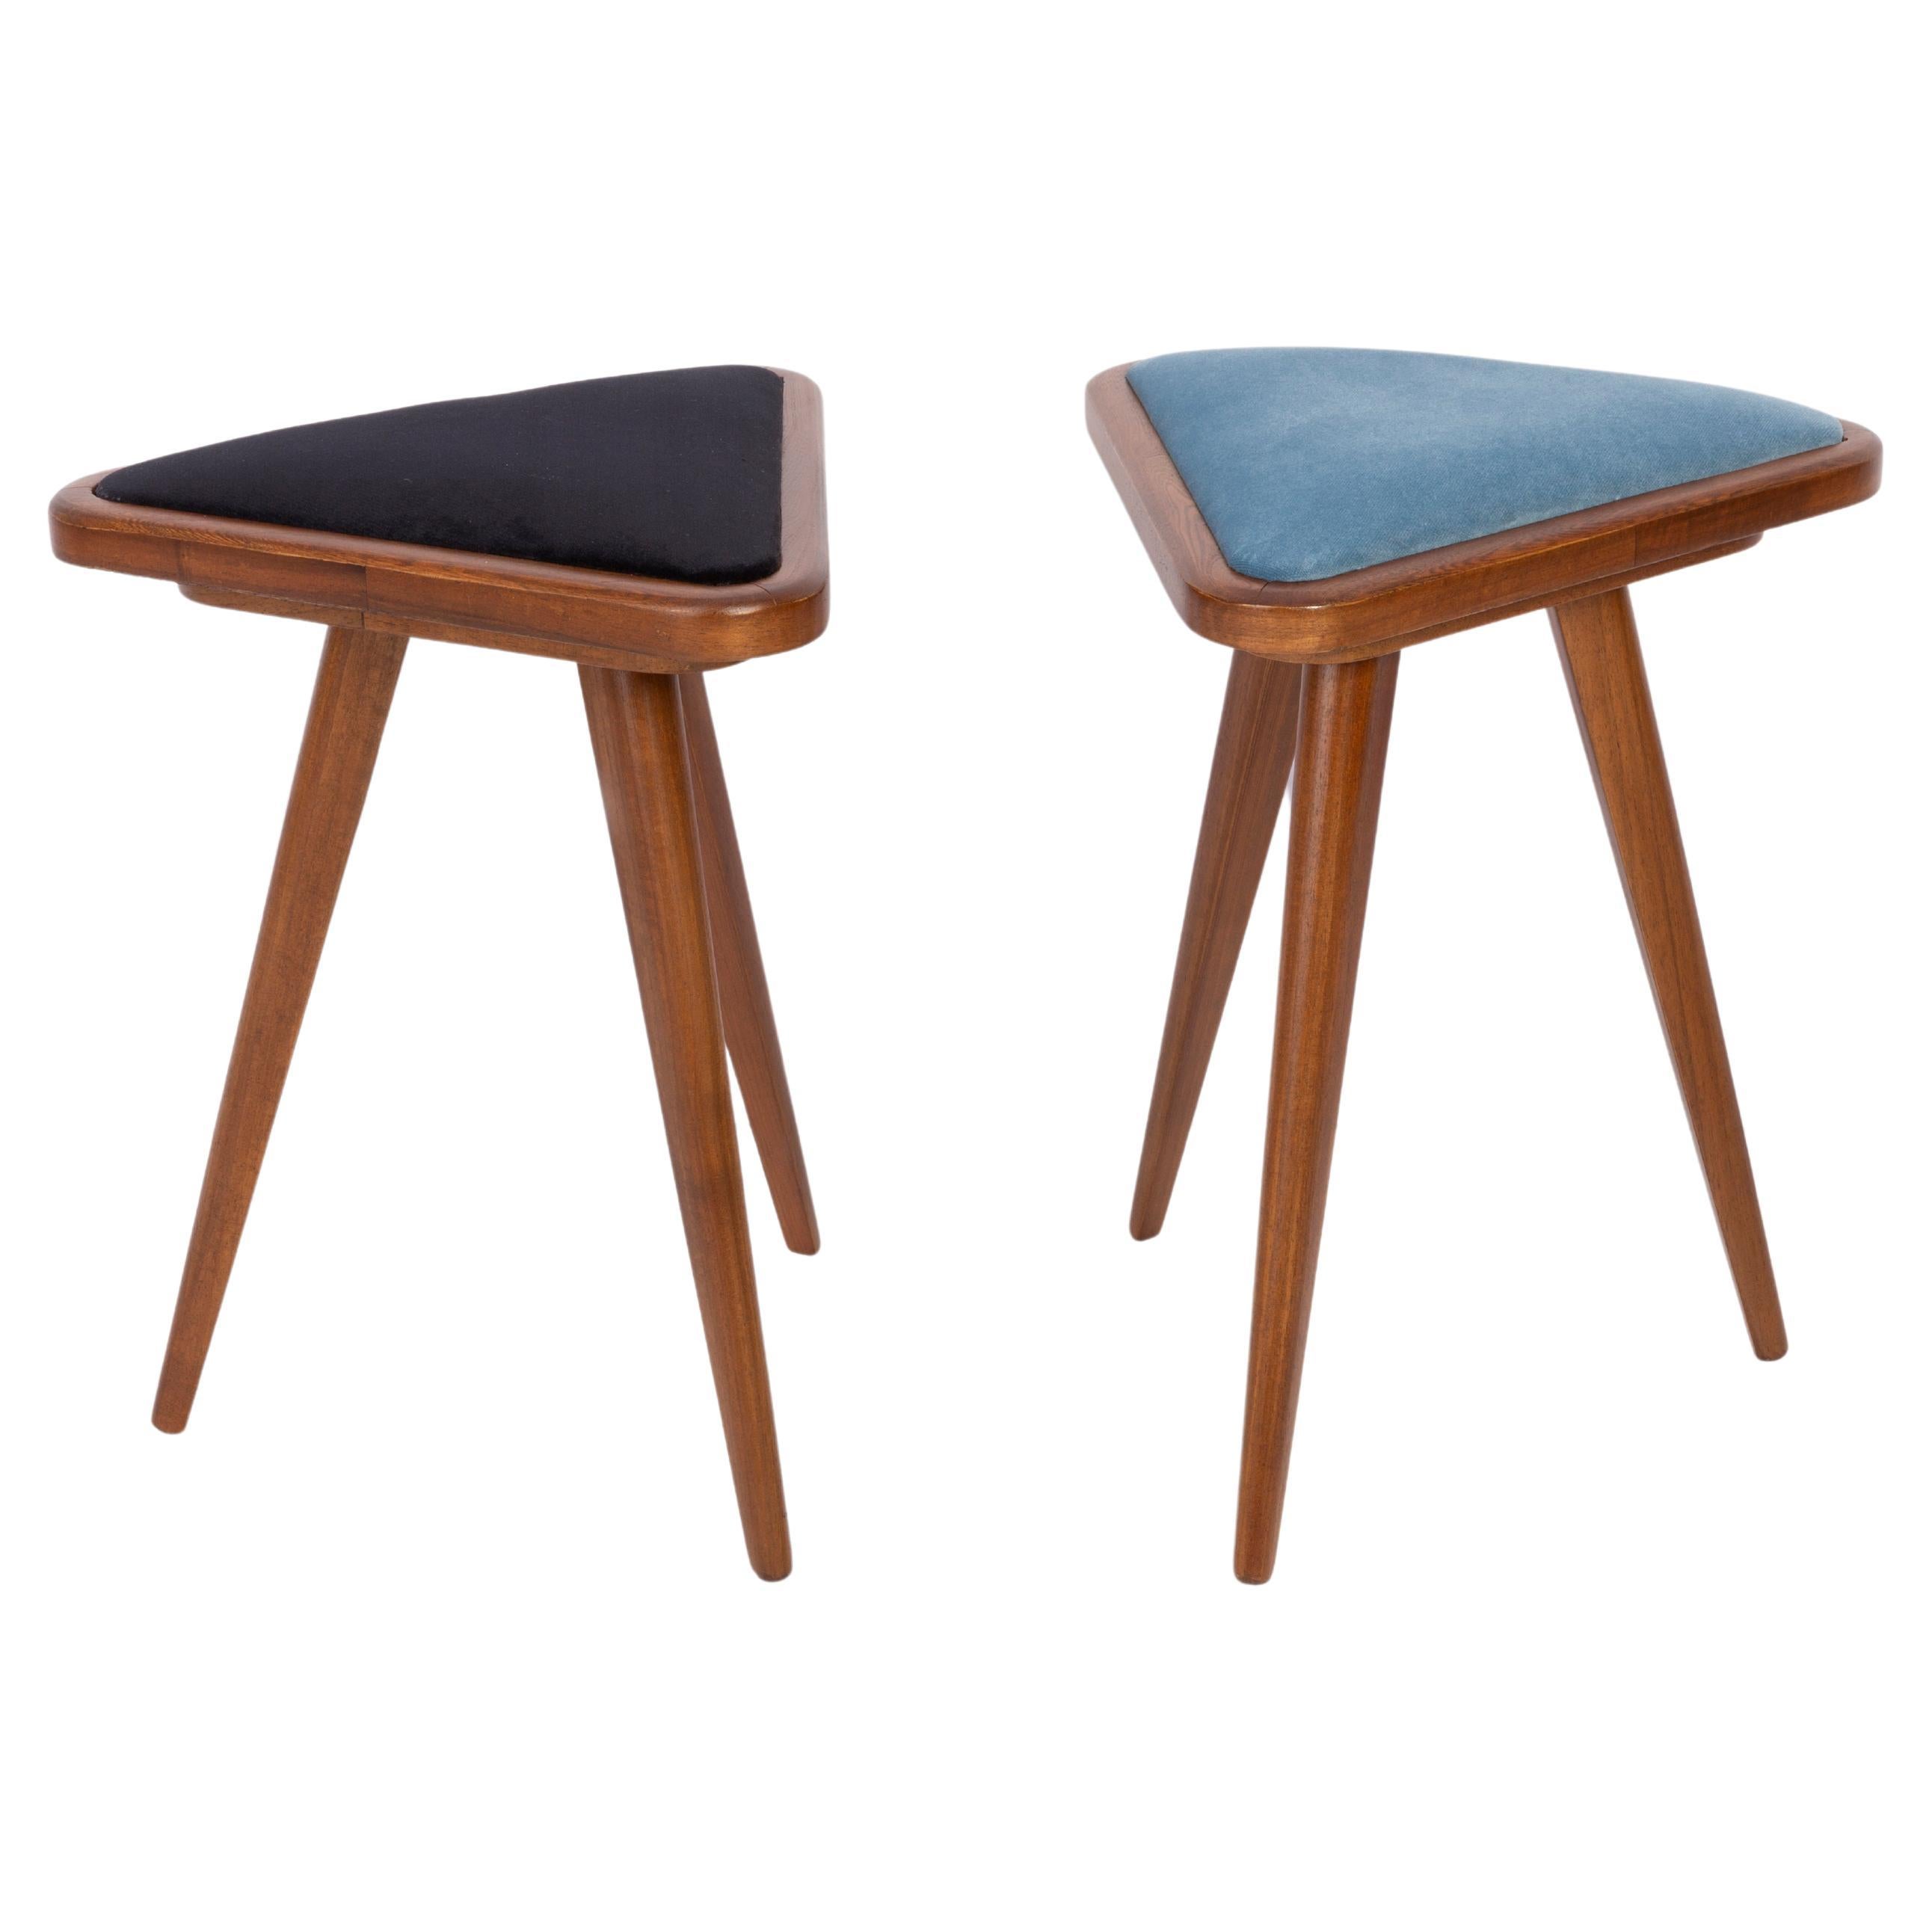 Set of Two Black and Blue Velvet 20th Century Stools, 1960s For Sale